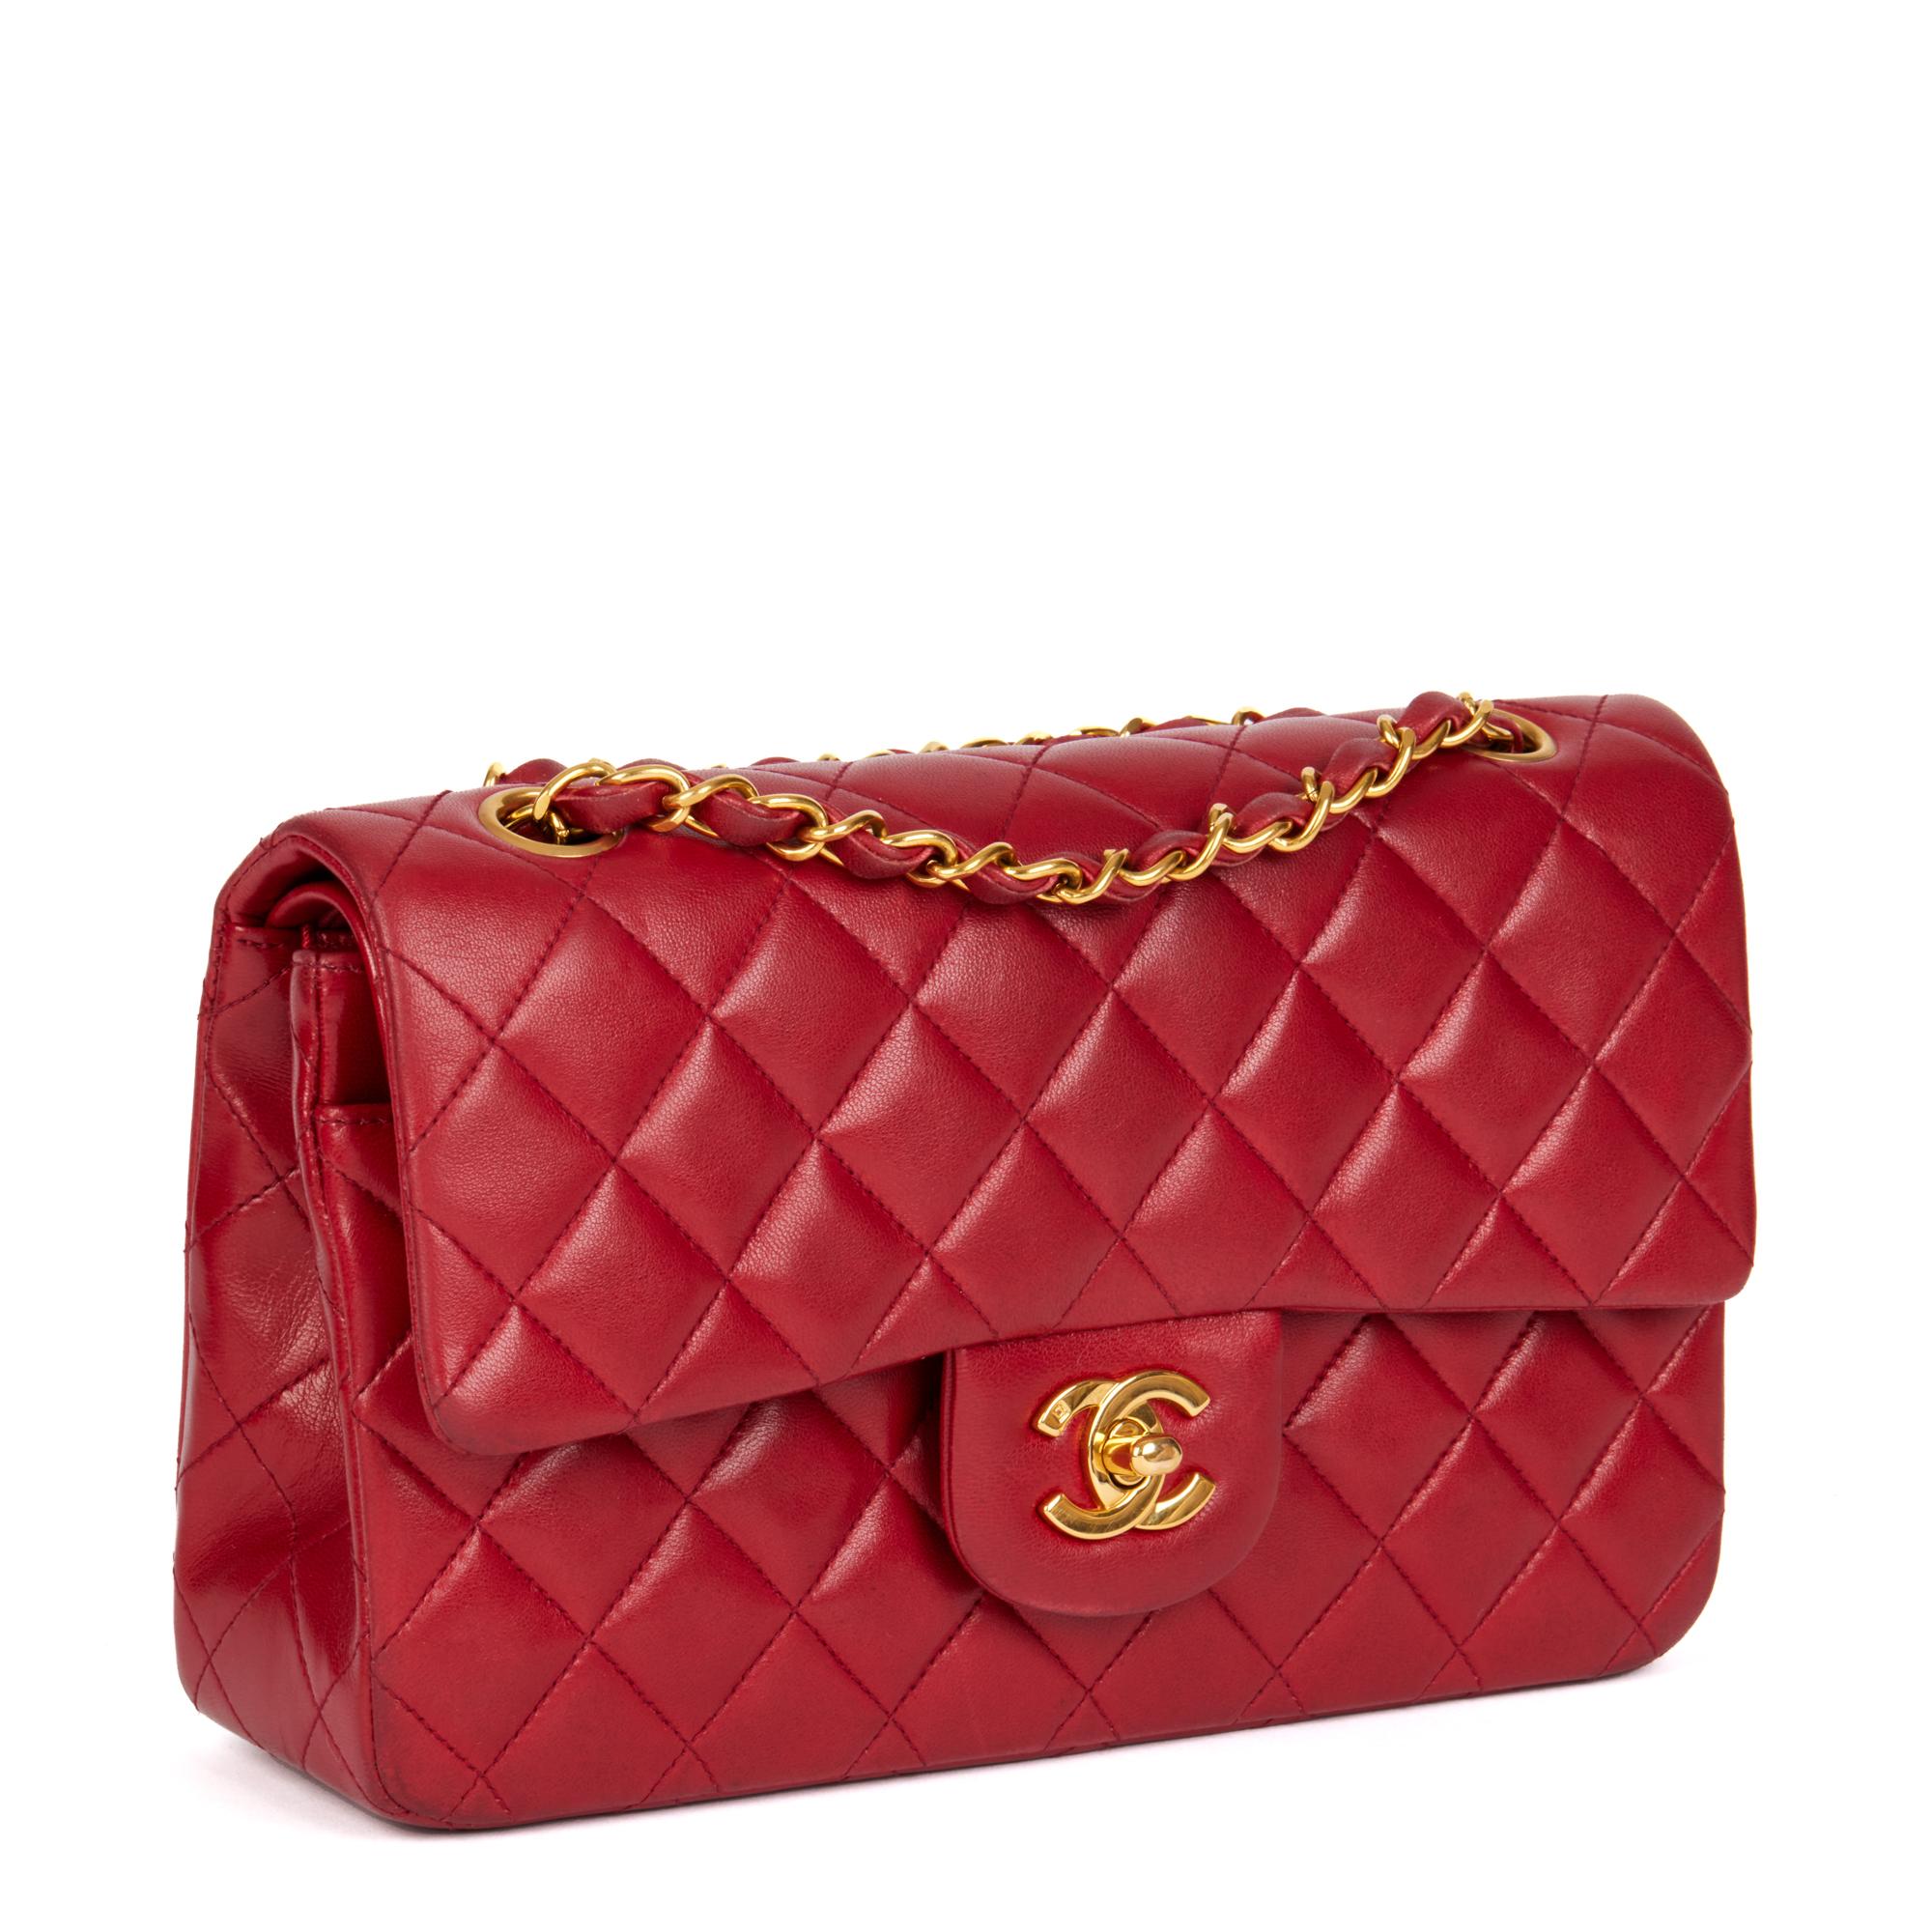 CHANEL
Red Quilted Lambskin Vintage Small Classic Double Flap Bag

Serial Number: 3560533
Age (Circa): 1996
Accompanied By: Chanel Box
Authenticity Details: Serial Sticker (Made in France)
Gender: Ladies
Type: Shoulder

Colour: Red
Hardware: Gold